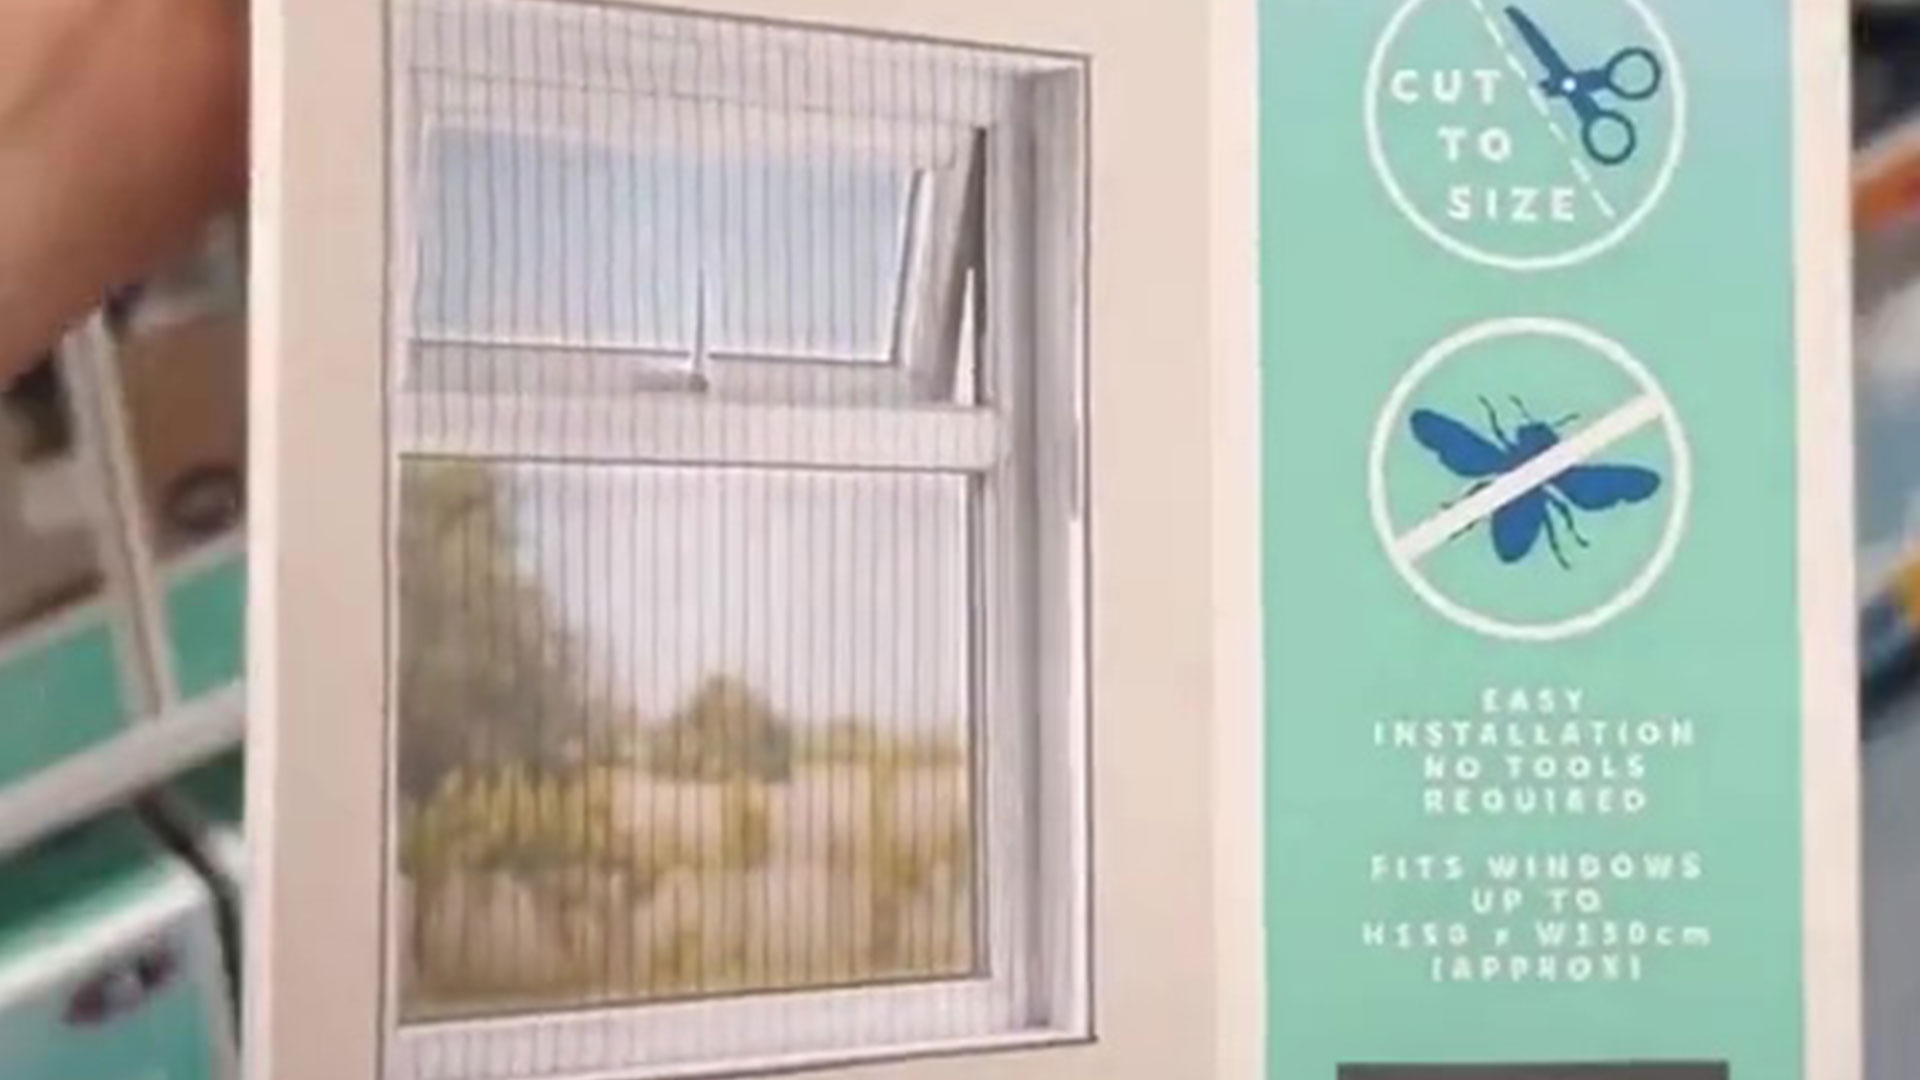 Shoppers rave about B&M’s £3 fly screen which lets you keep your windows open but the bugs out in the heat